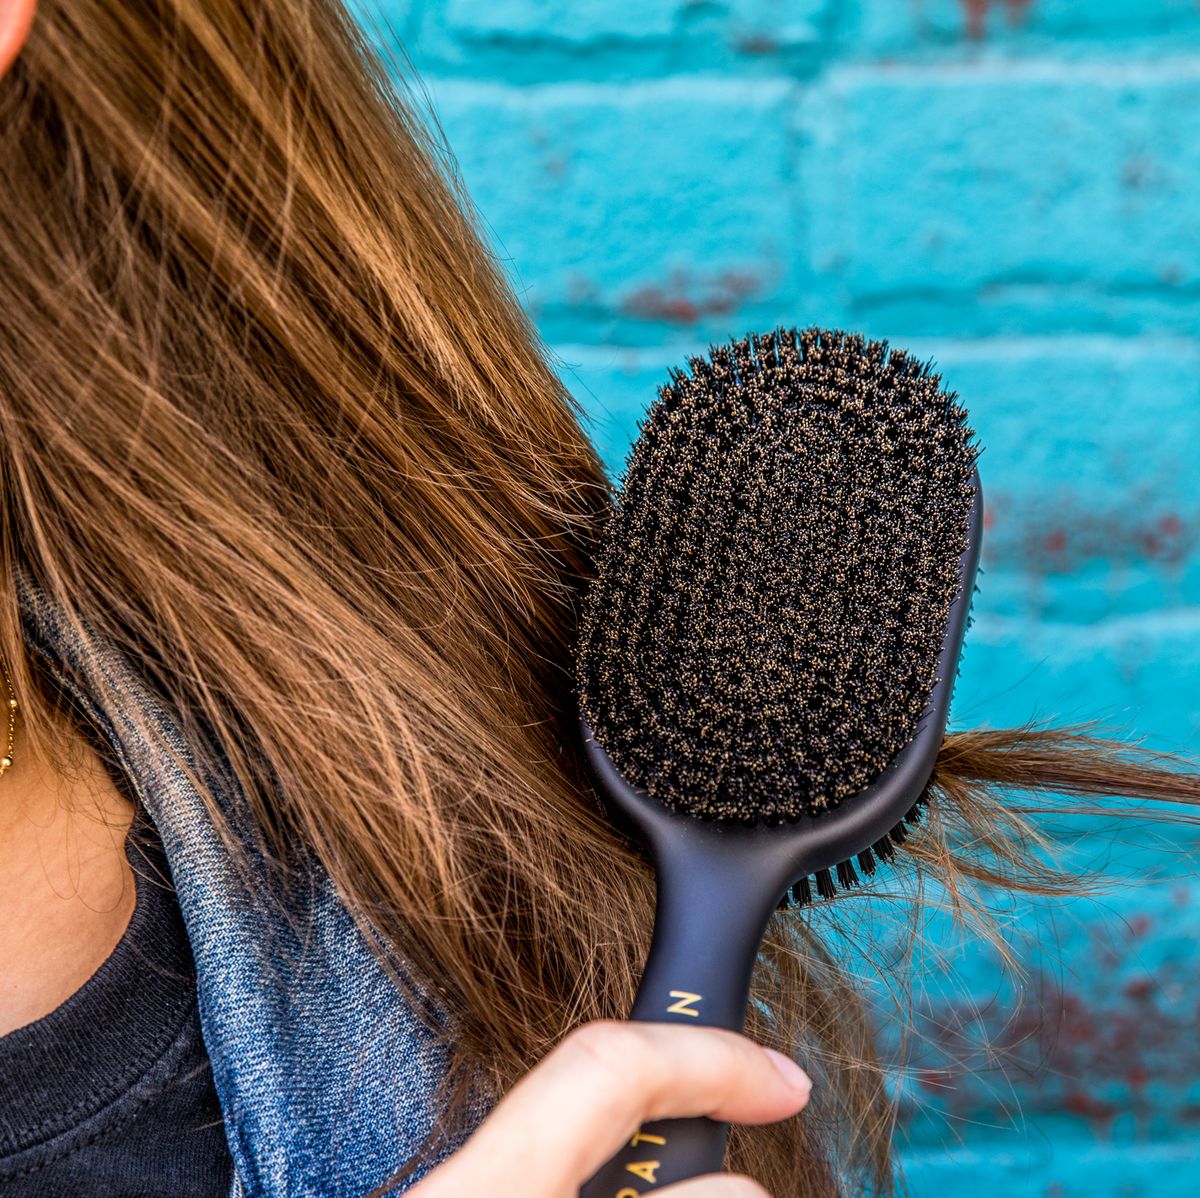 Are You Using the Right Hairbrush for Your Hair Type?